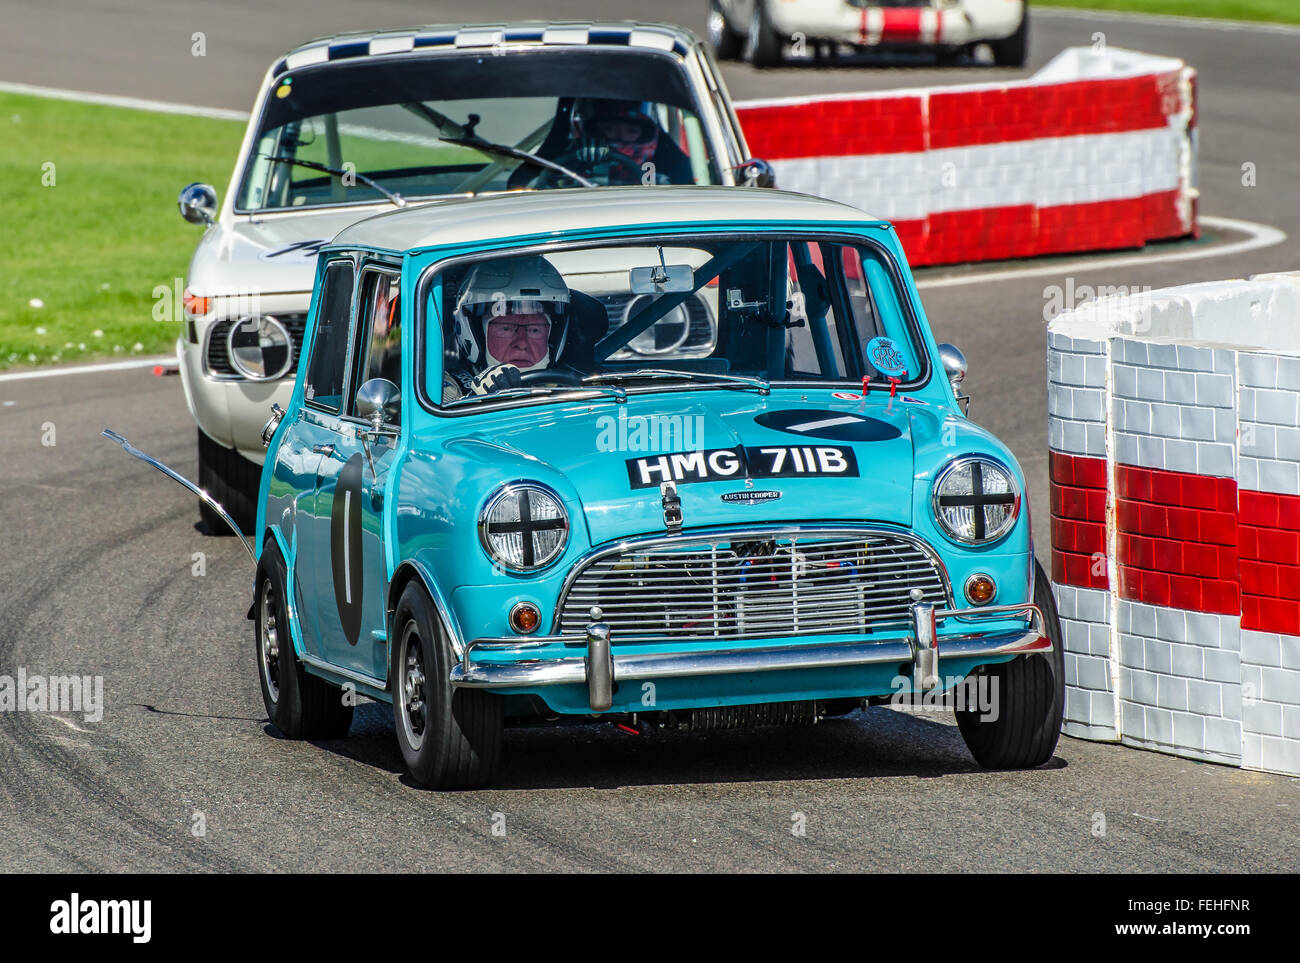 1964 Austin Mini Cooper S is owned by Jason Stanley and was raced by Rauno Aaltonen at the 2015 Goodwood Revival Stock Photo